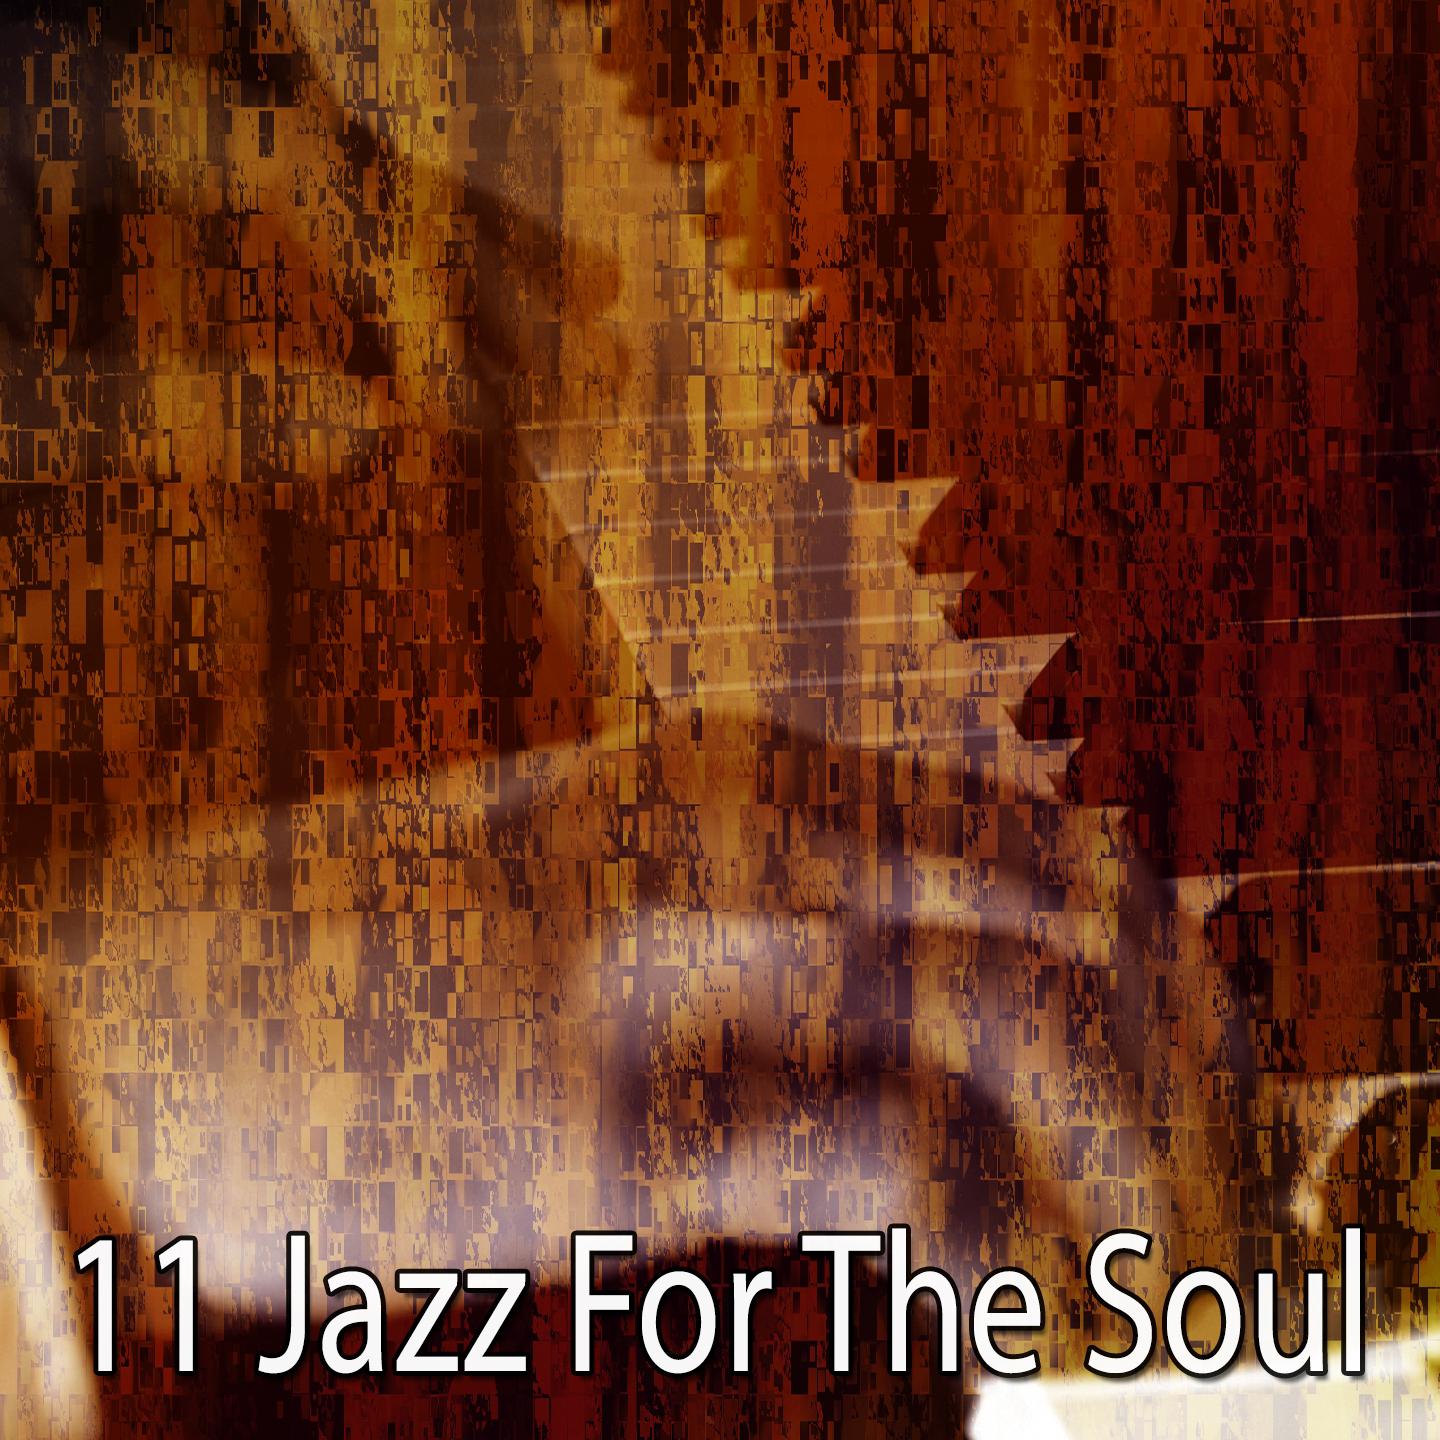 11 Jazz for the Soul